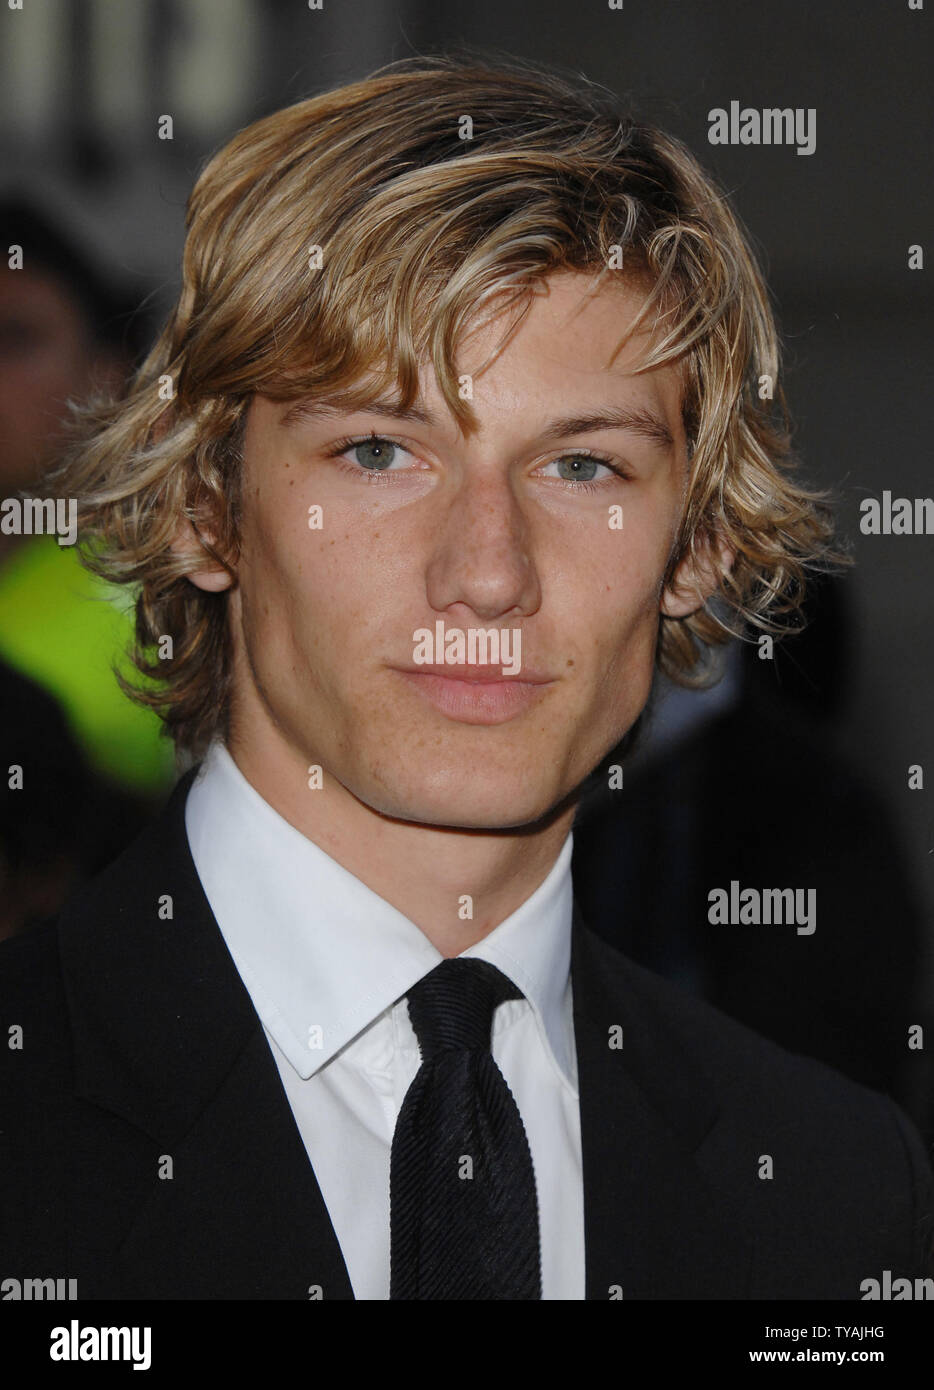 British actor Alex Pettyfer attends the premiere of "The Bourne Ultimatum" at Odeon, Leicester Square in London on August 15, 2007.  (UPI Photo/Rune Hellestad) Stock Photo